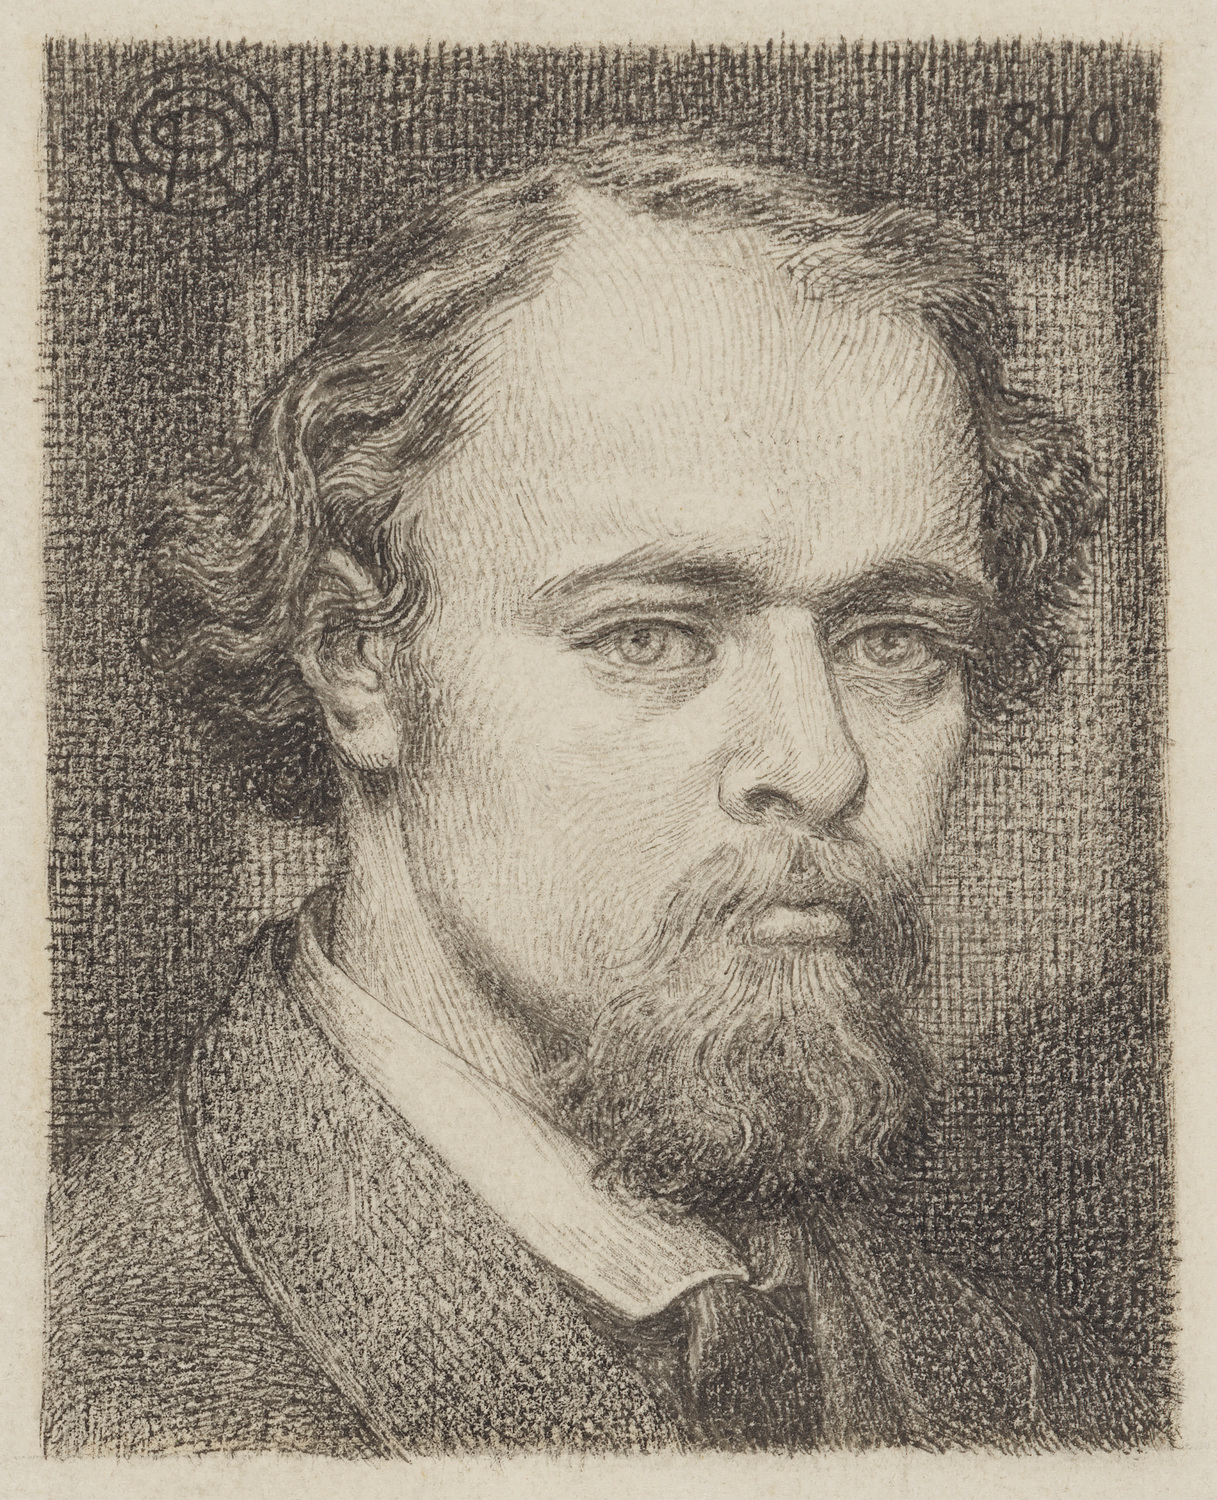 The black-and-white self-portrait shows the artist in middle age, in a head-and shoulders close-up. He is positioned in three-quarters view, eyes facing the viewer. He is wearing a jacket, collar, and tie. He has a beard and moustache, a receding hairline, and wavy hair brushed back behind his ears. The background is created by dark cross-hatched lines, with a lightened box, like a window, positioned just behind the figure’s head. The artist’s monogram, DGR, is in the upper left corner and the date, 1870, is written in the upper right.